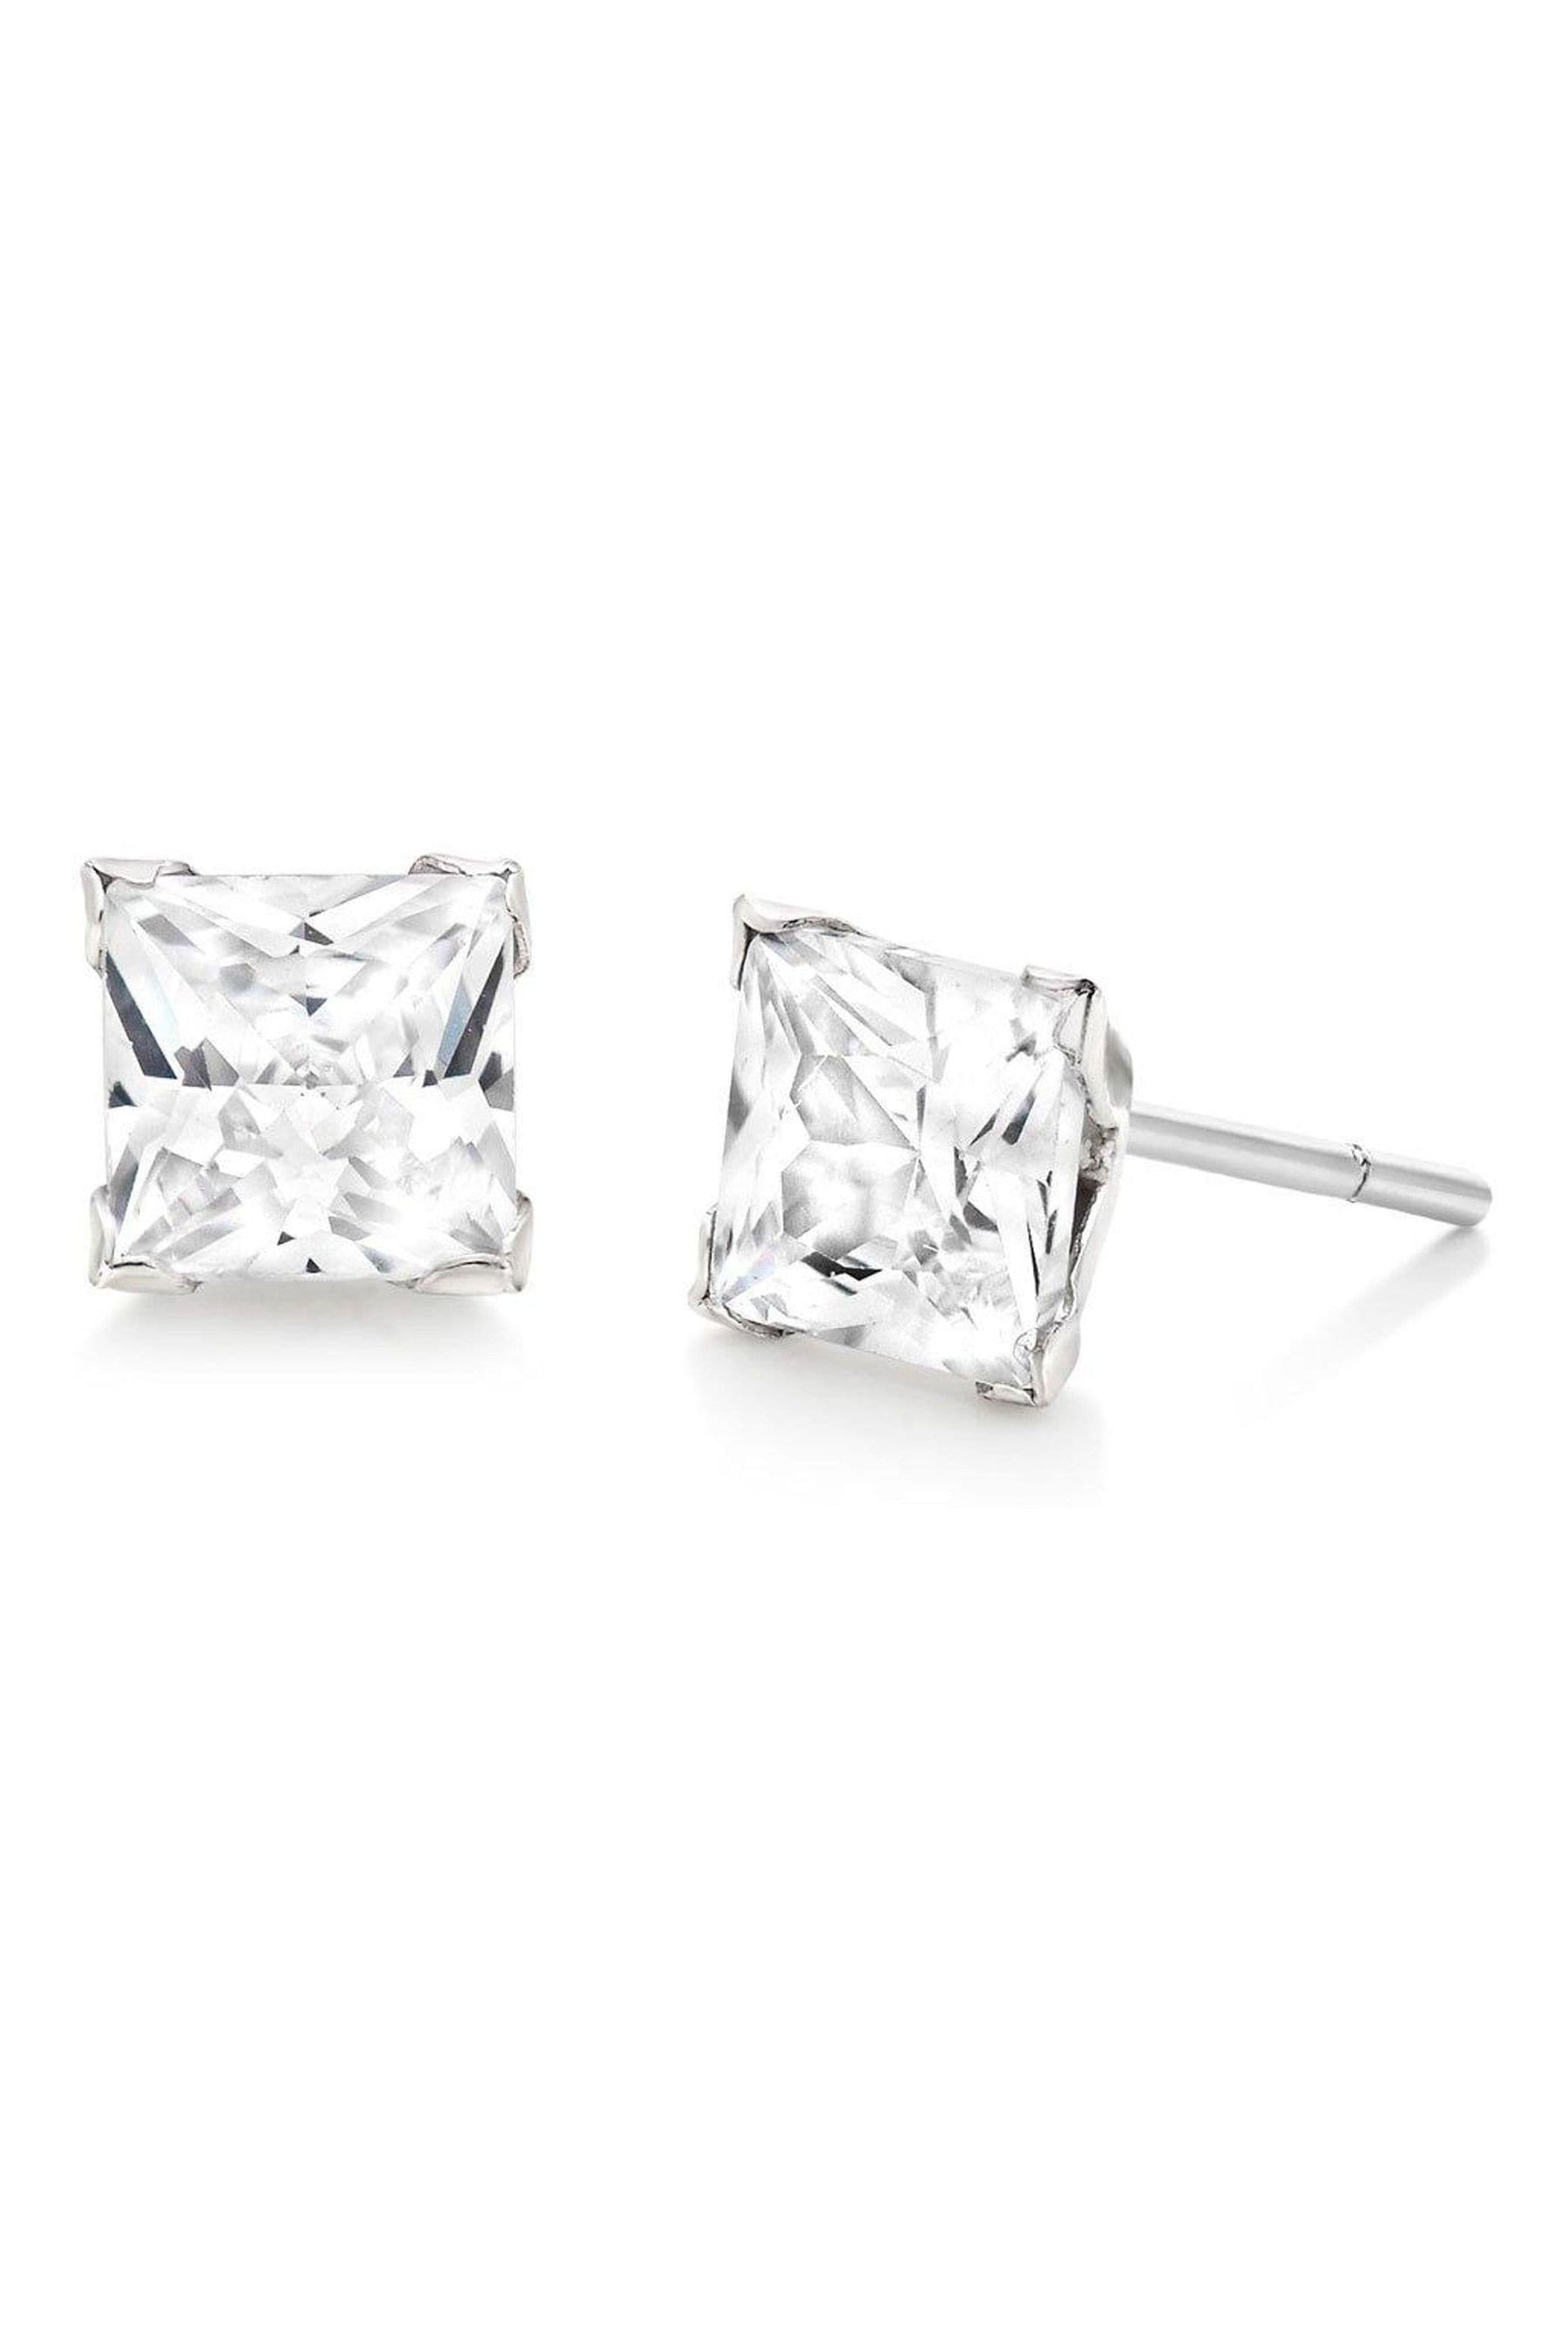 Buy Beaverbrooks 9ct Cubic Zirconia Stud Earrings from the Next UK ...